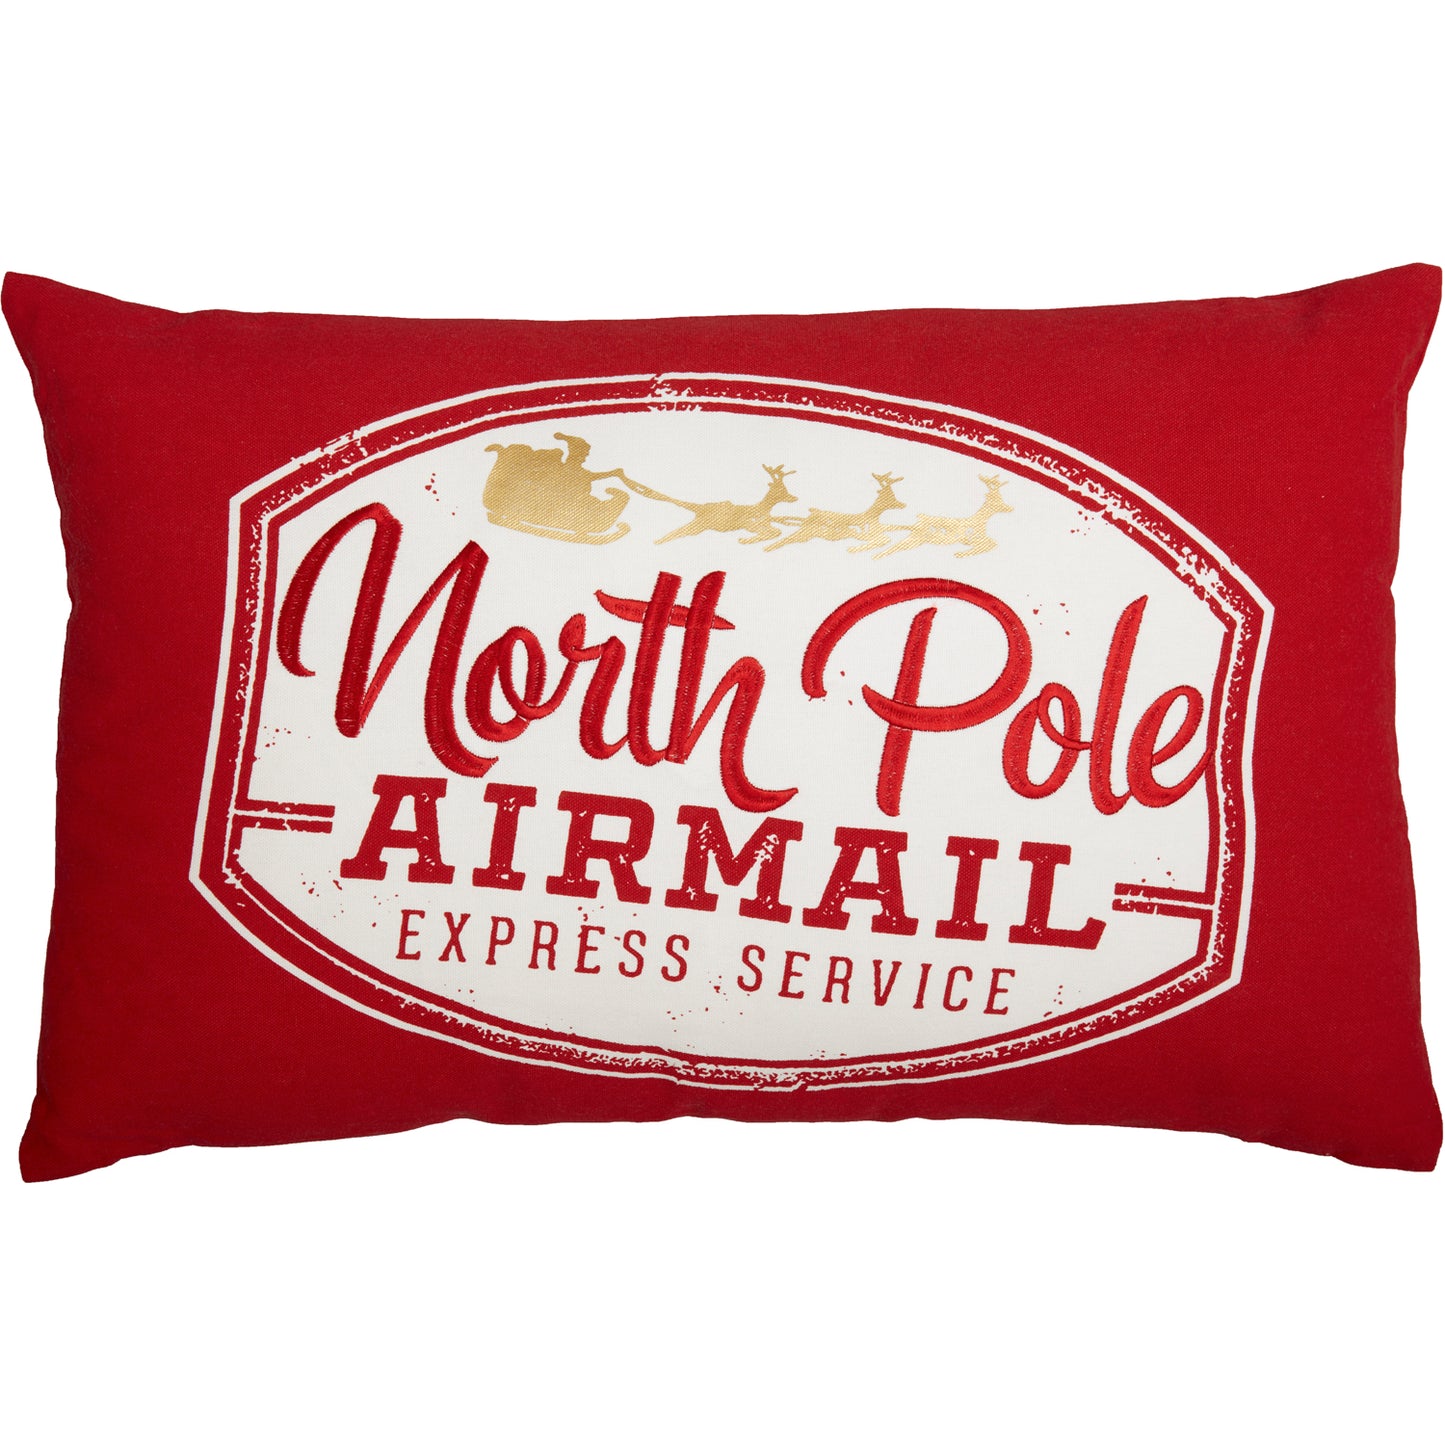 60359-North-Pole-Airmail-Pillow-14x22-image-2